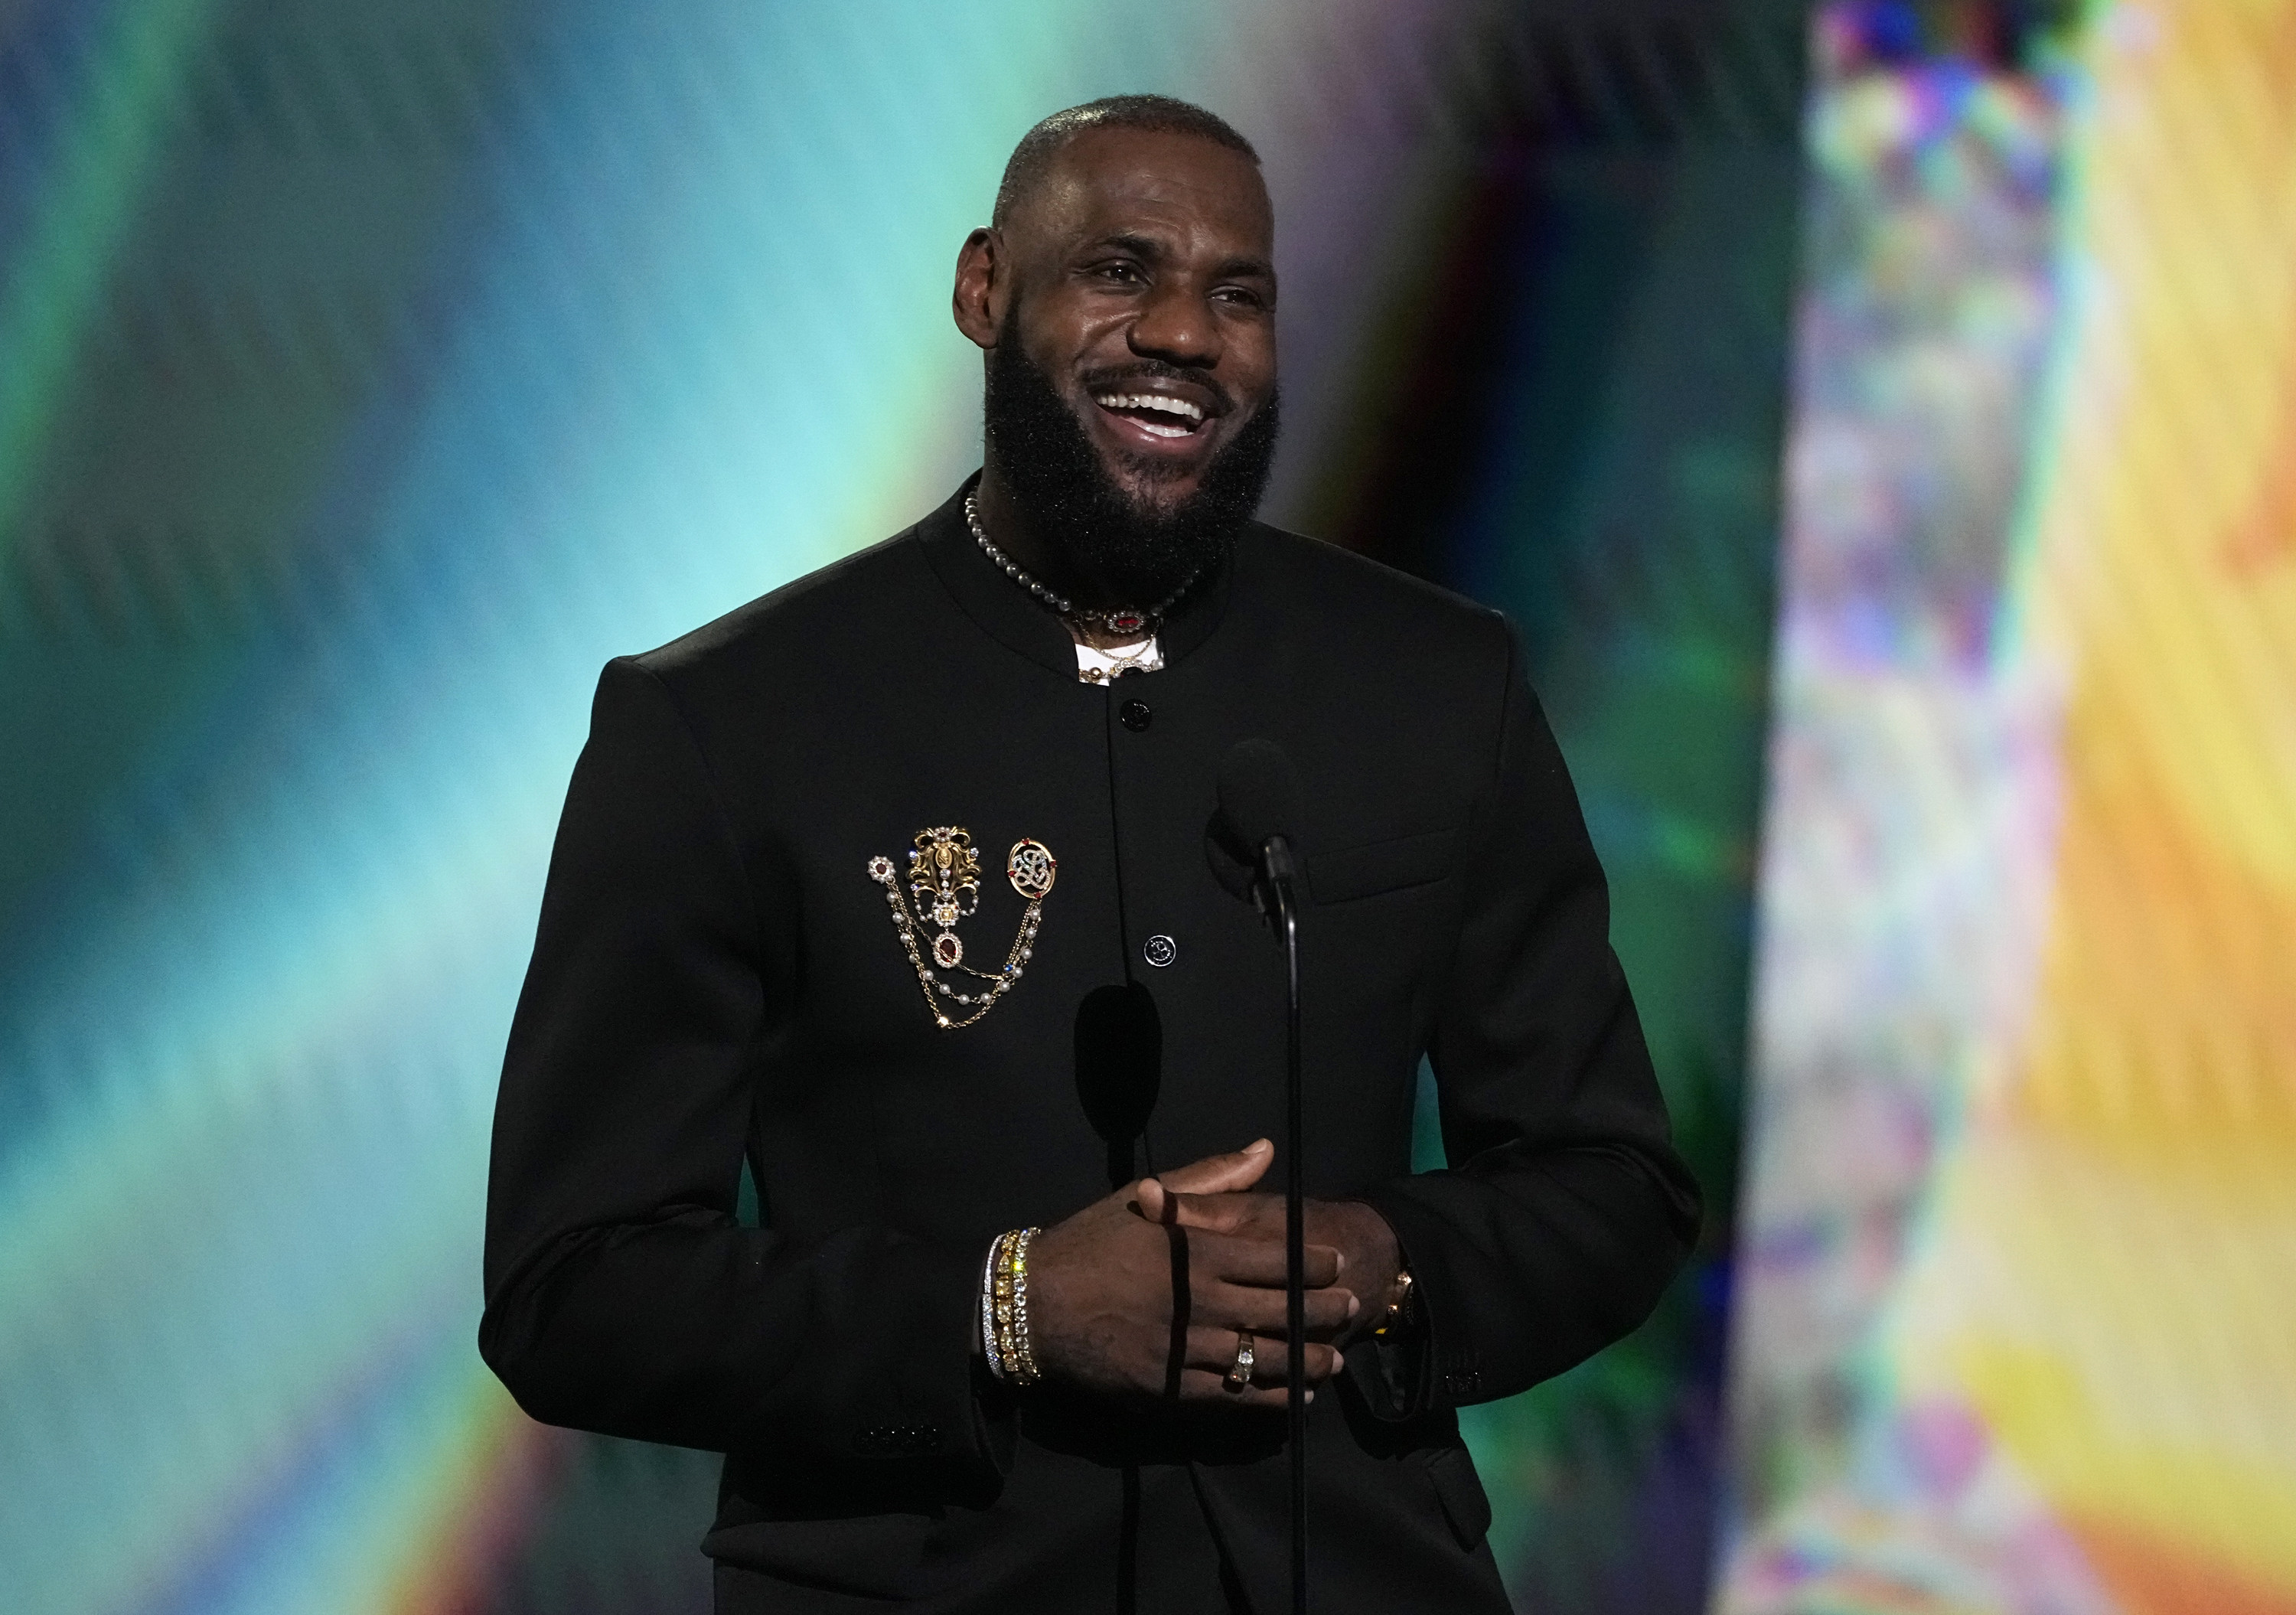 LeBron James addresses the audience at the ESPY awards in Los Angeles. Photo: AP